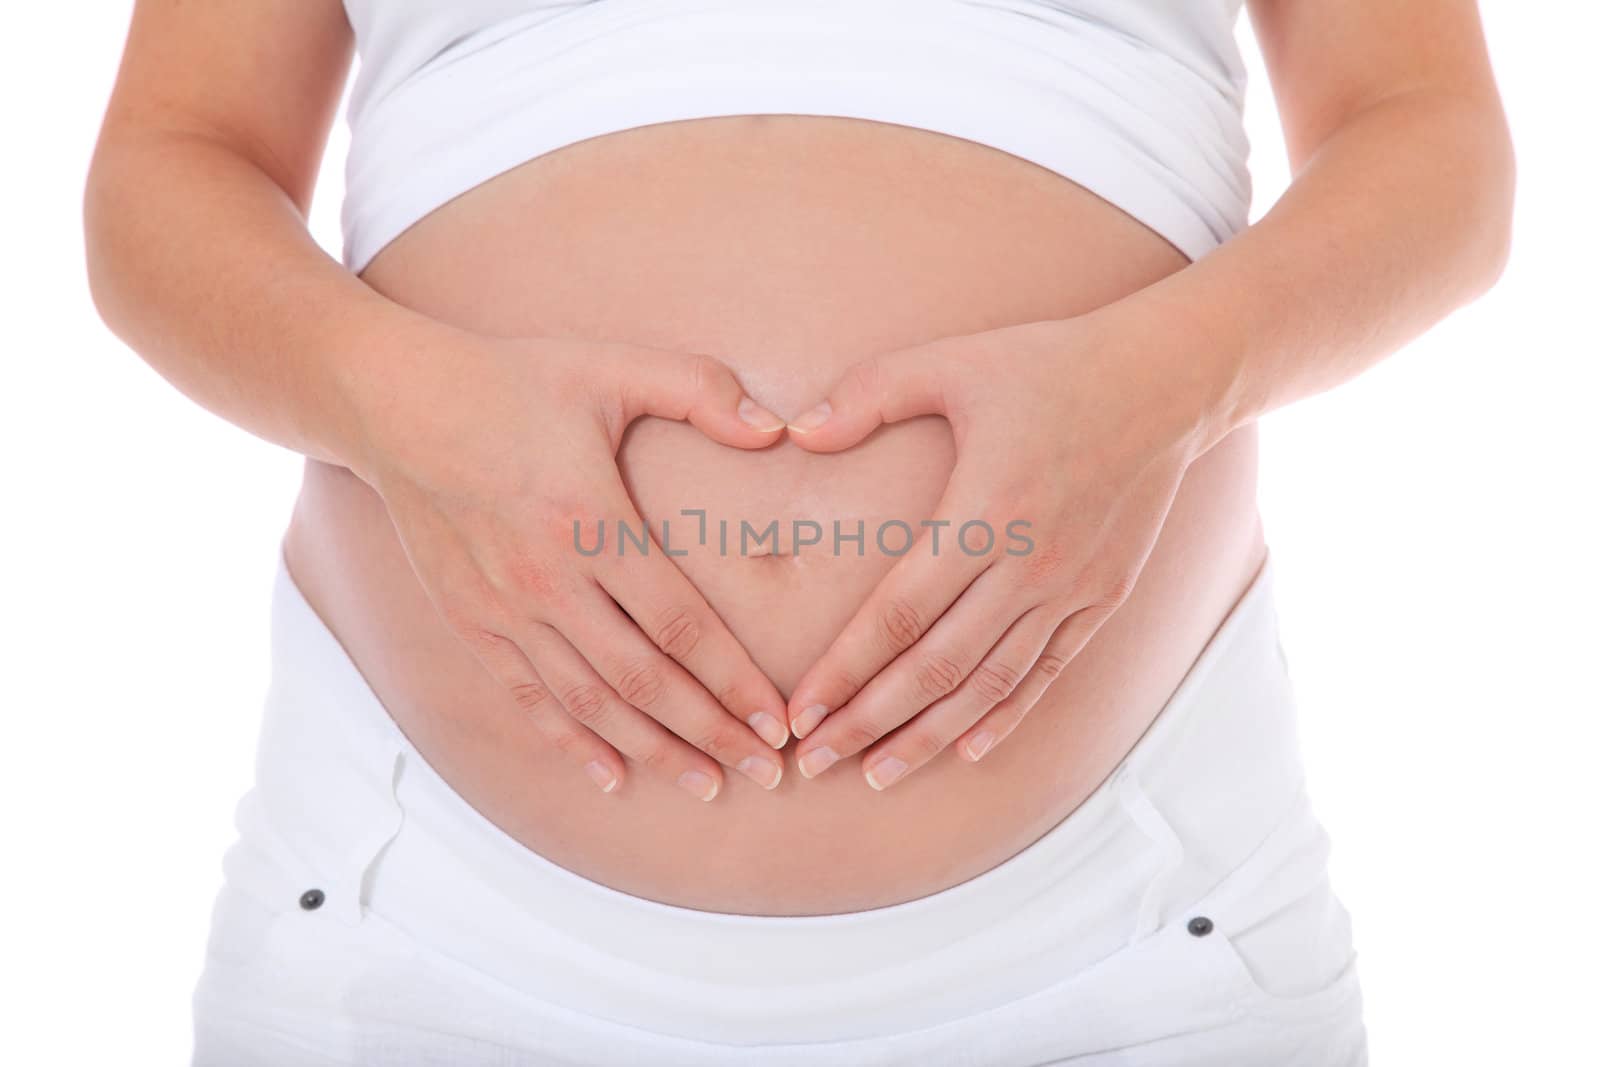 Pregnant woman forming heart out of her hands on her baby bump. All on white background.